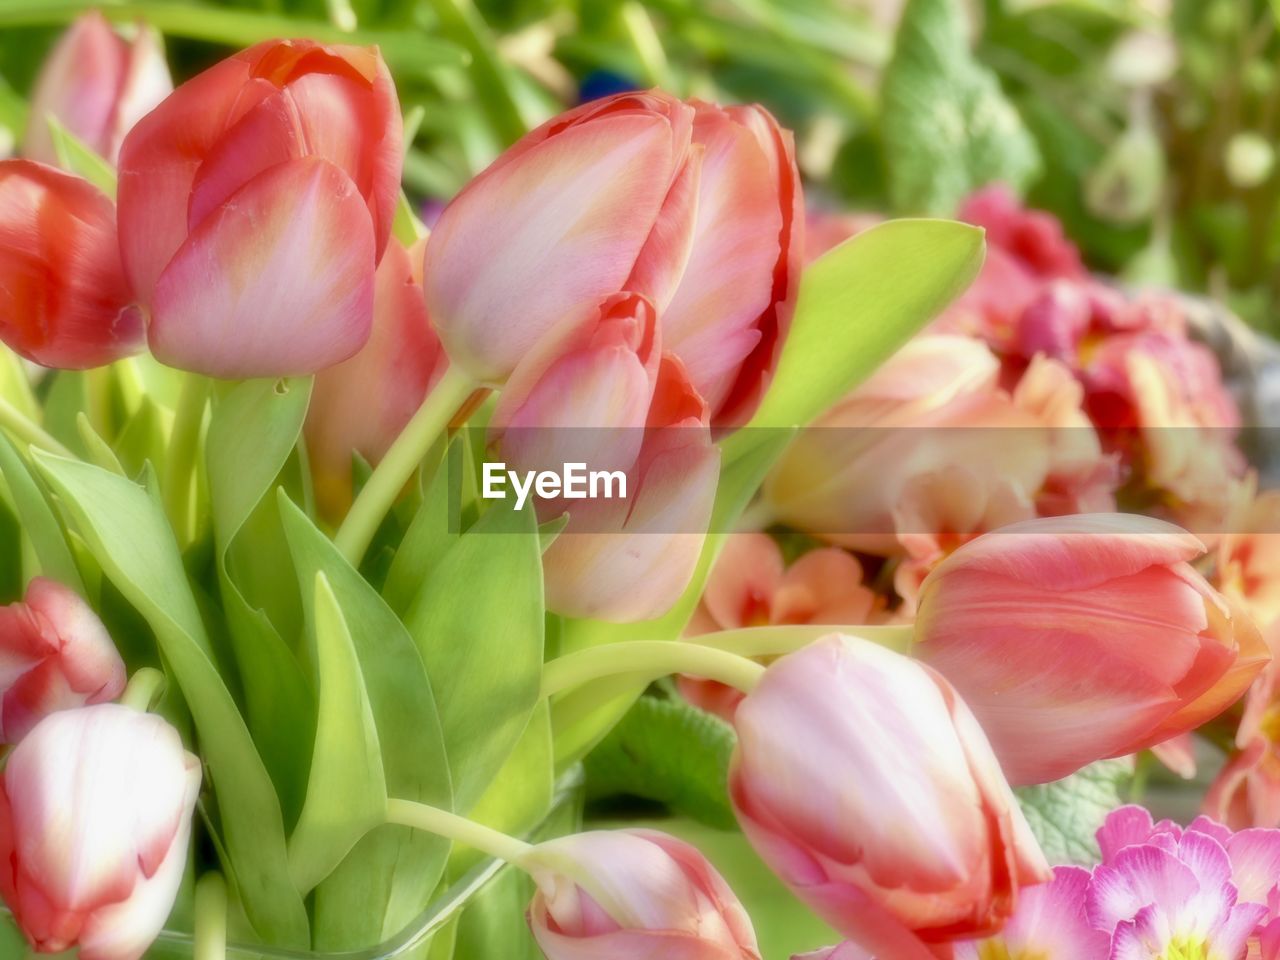 plant, flower, flowering plant, freshness, beauty in nature, tulip, close-up, pink, nature, fragility, petal, no people, flower head, plant part, leaf, inflorescence, springtime, green, growth, outdoors, focus on foreground, selective focus, day, multi colored, flower arrangement, blossom, bouquet, bud, plant bulb, bunch of flowers